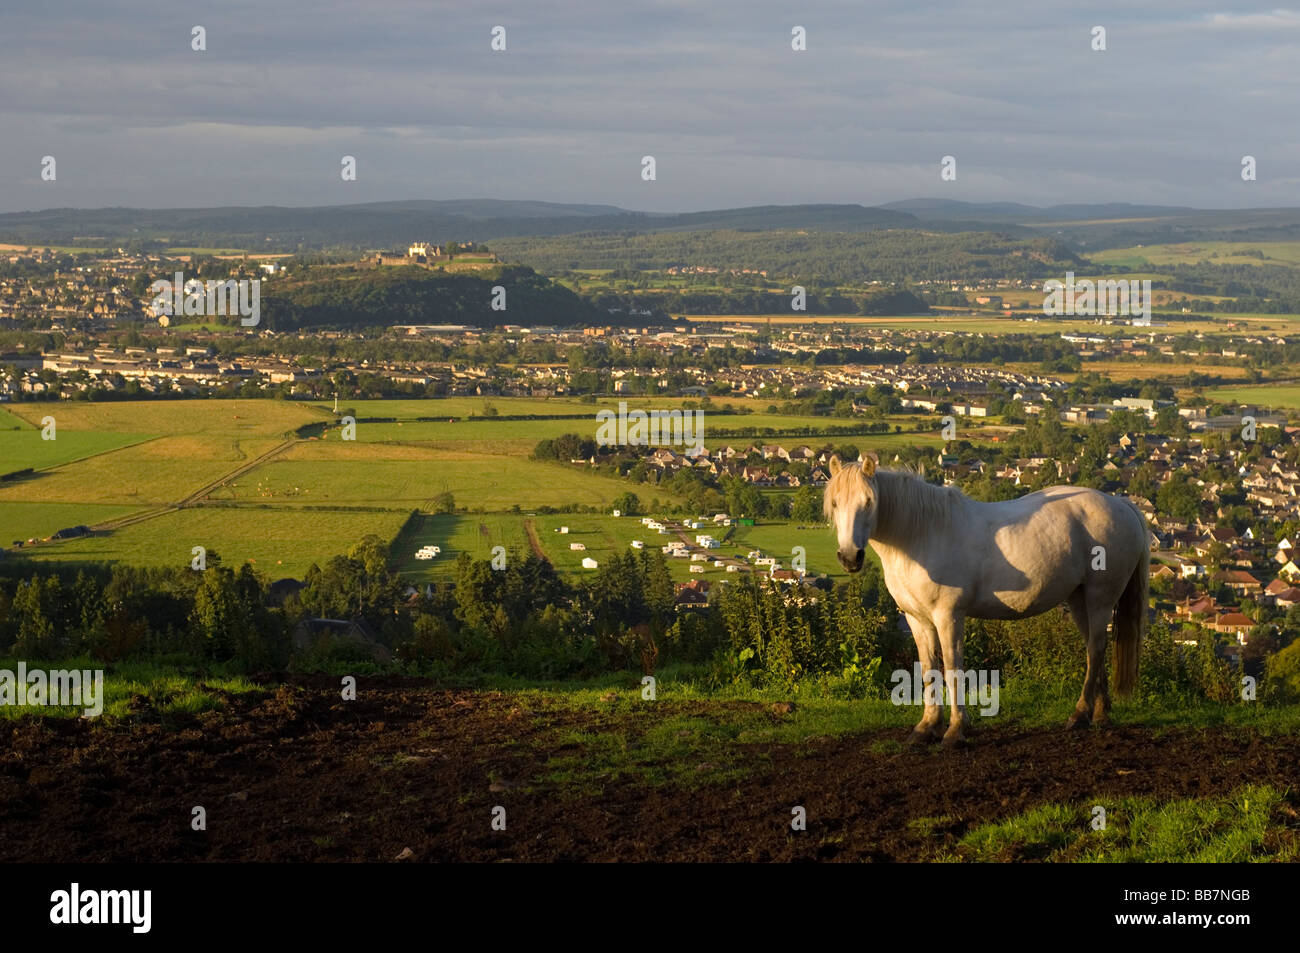 A white horse standing in a field in the Ochil hills above Bridge of Allan, looking to Stirling, and its castle, Scotland. Stock Photo